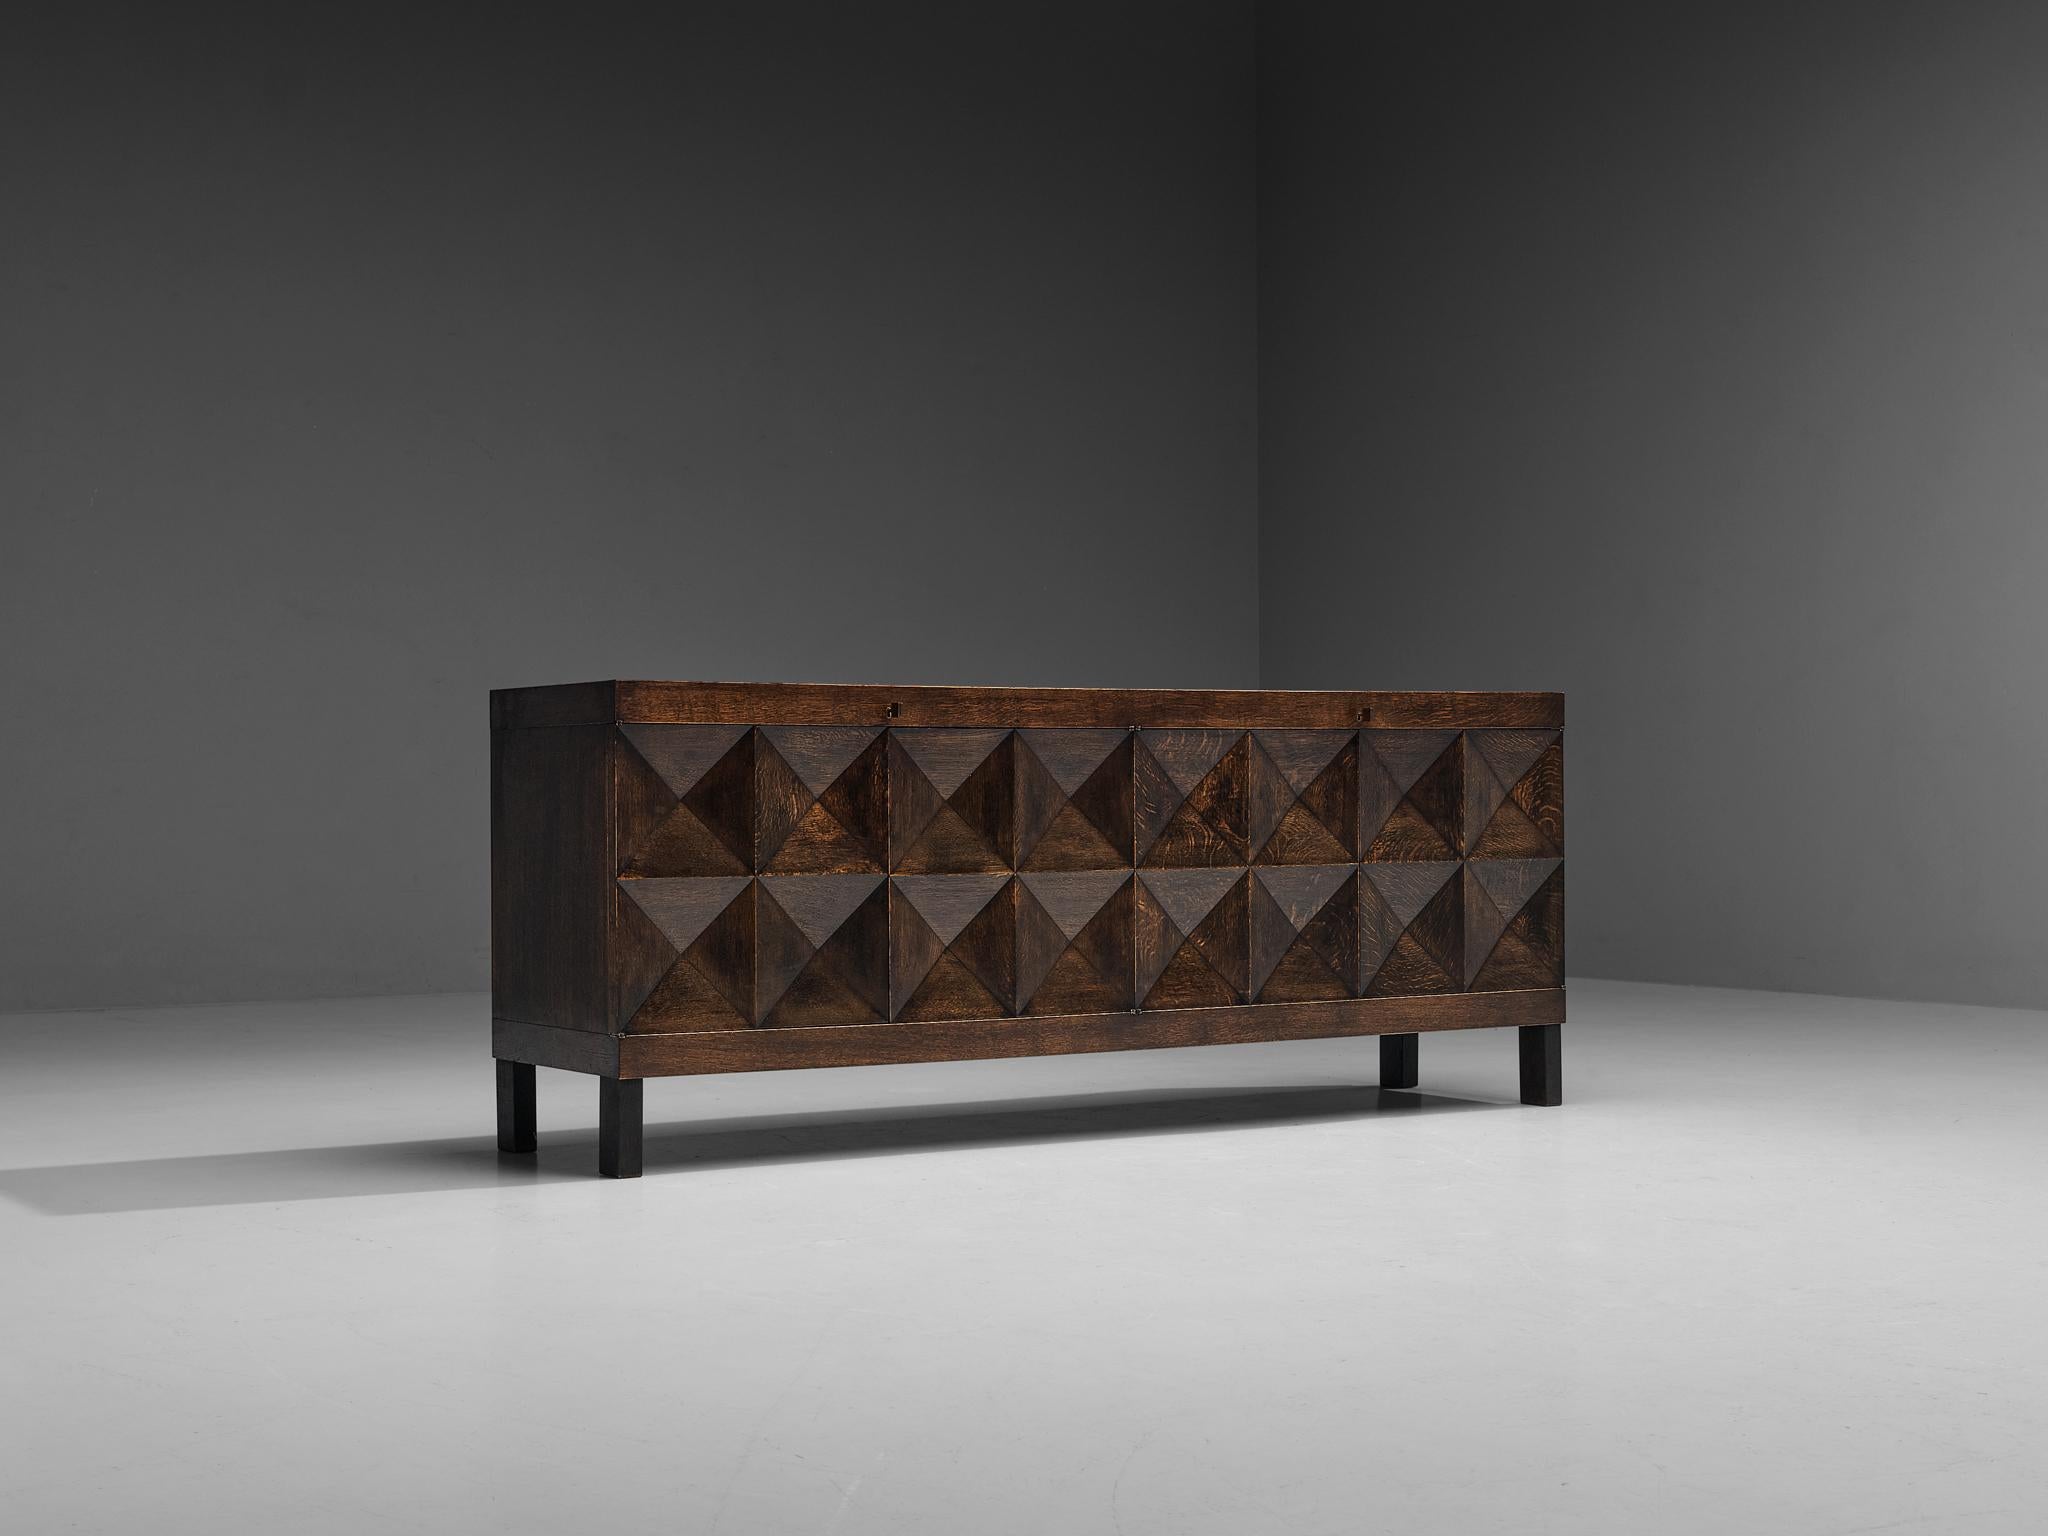 Sideboard, stained oak, Belgium, 1970s. 

Executed in dark stained oak that shows a dynamic grain pattern. On the front side, this credenza shows a pyramid like geometrical pattern on its doors. The squares on the front are each divided in four